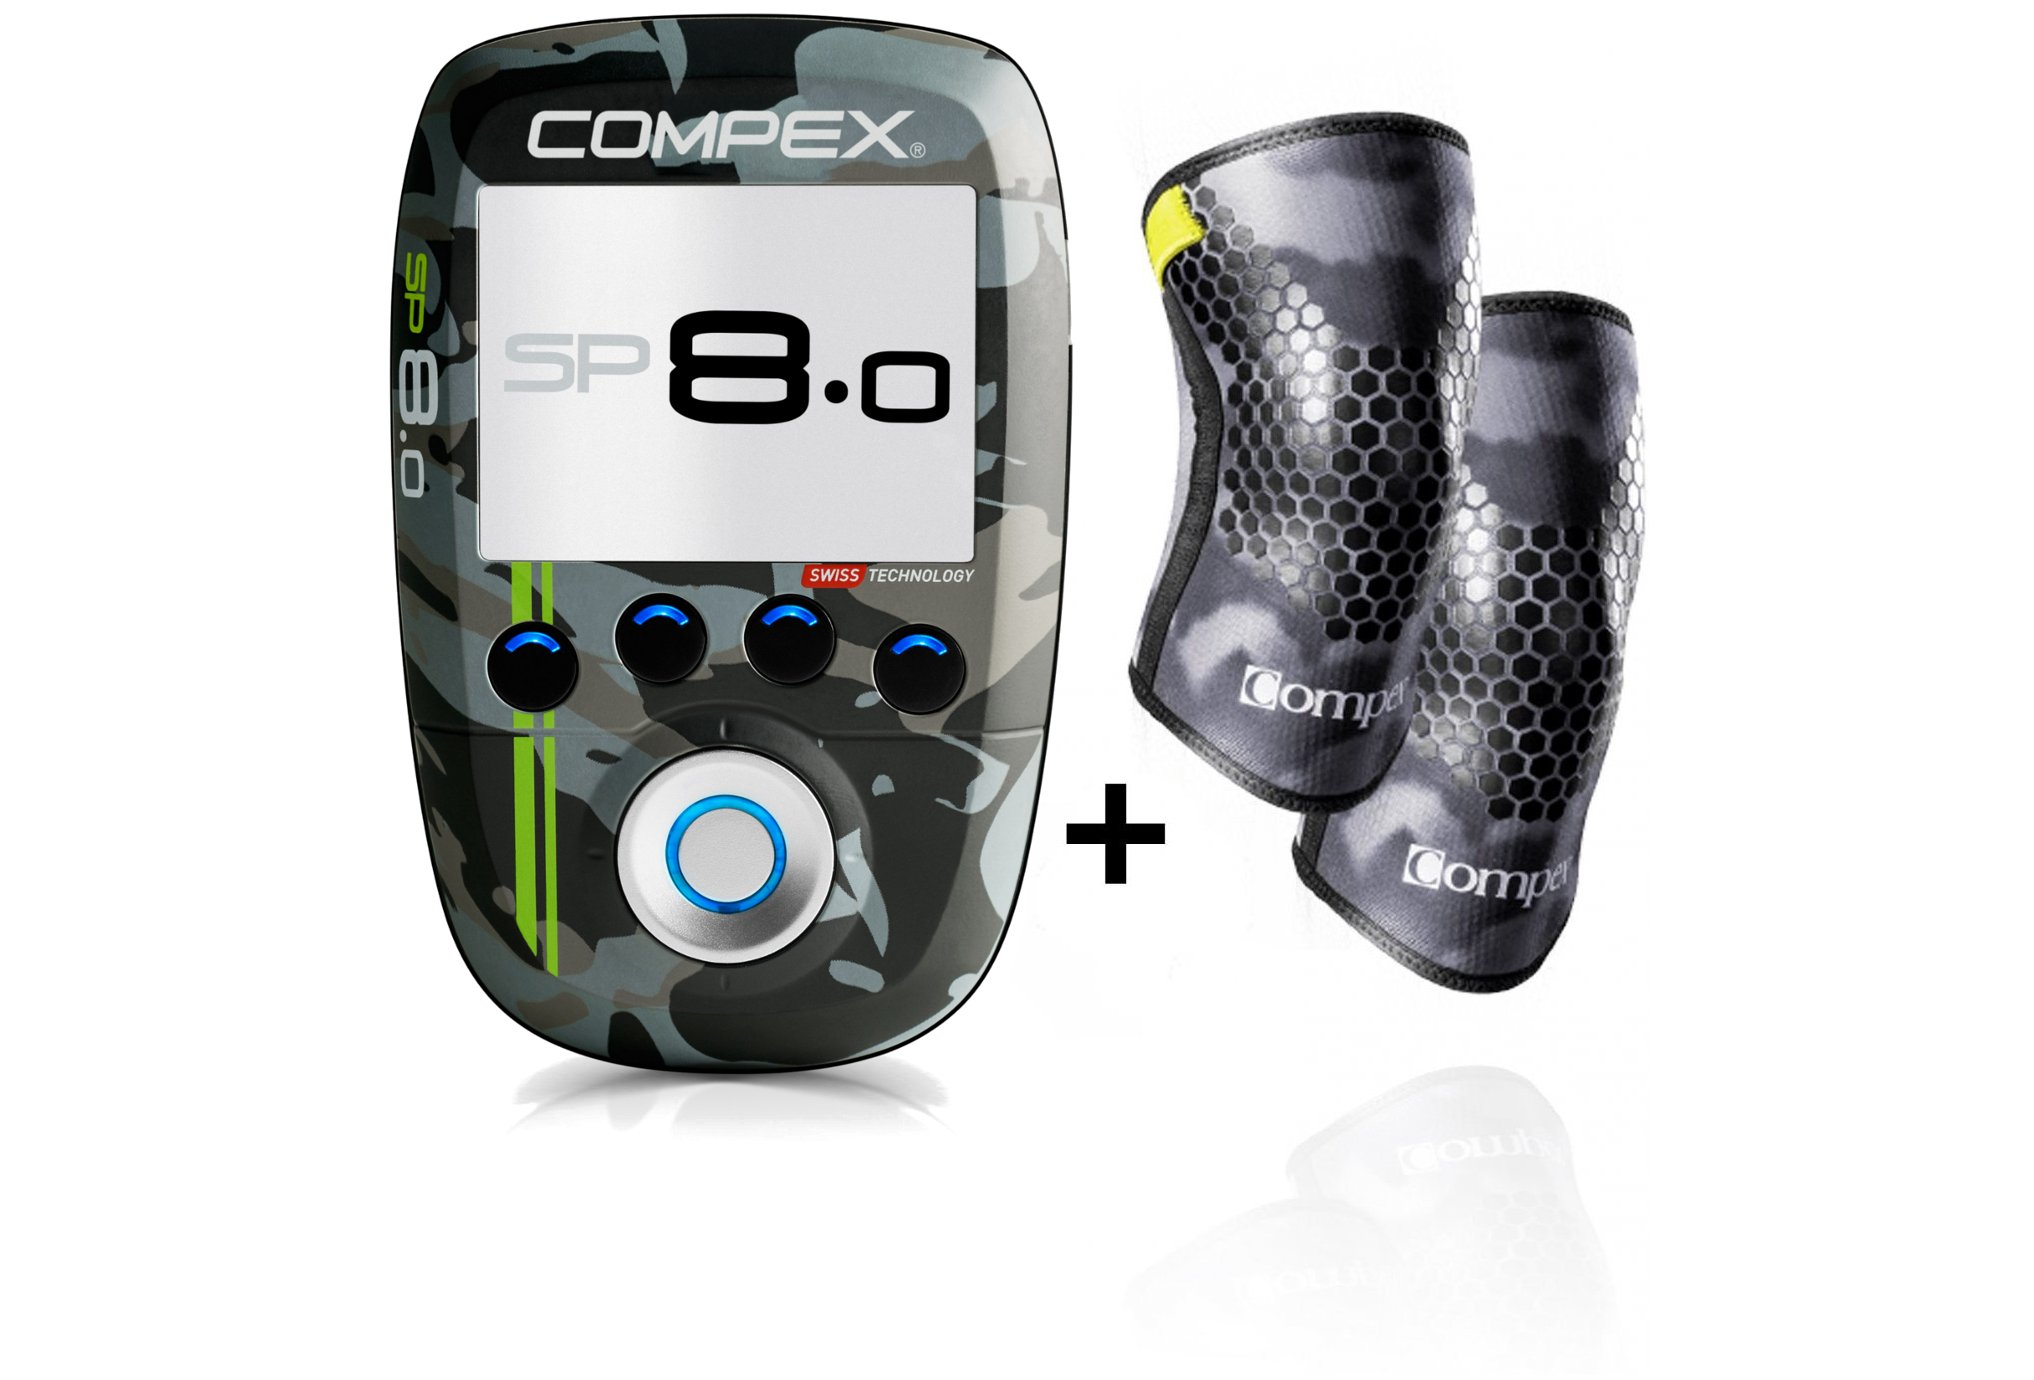 Compex 8 SP WOD edition neuf : Equipements